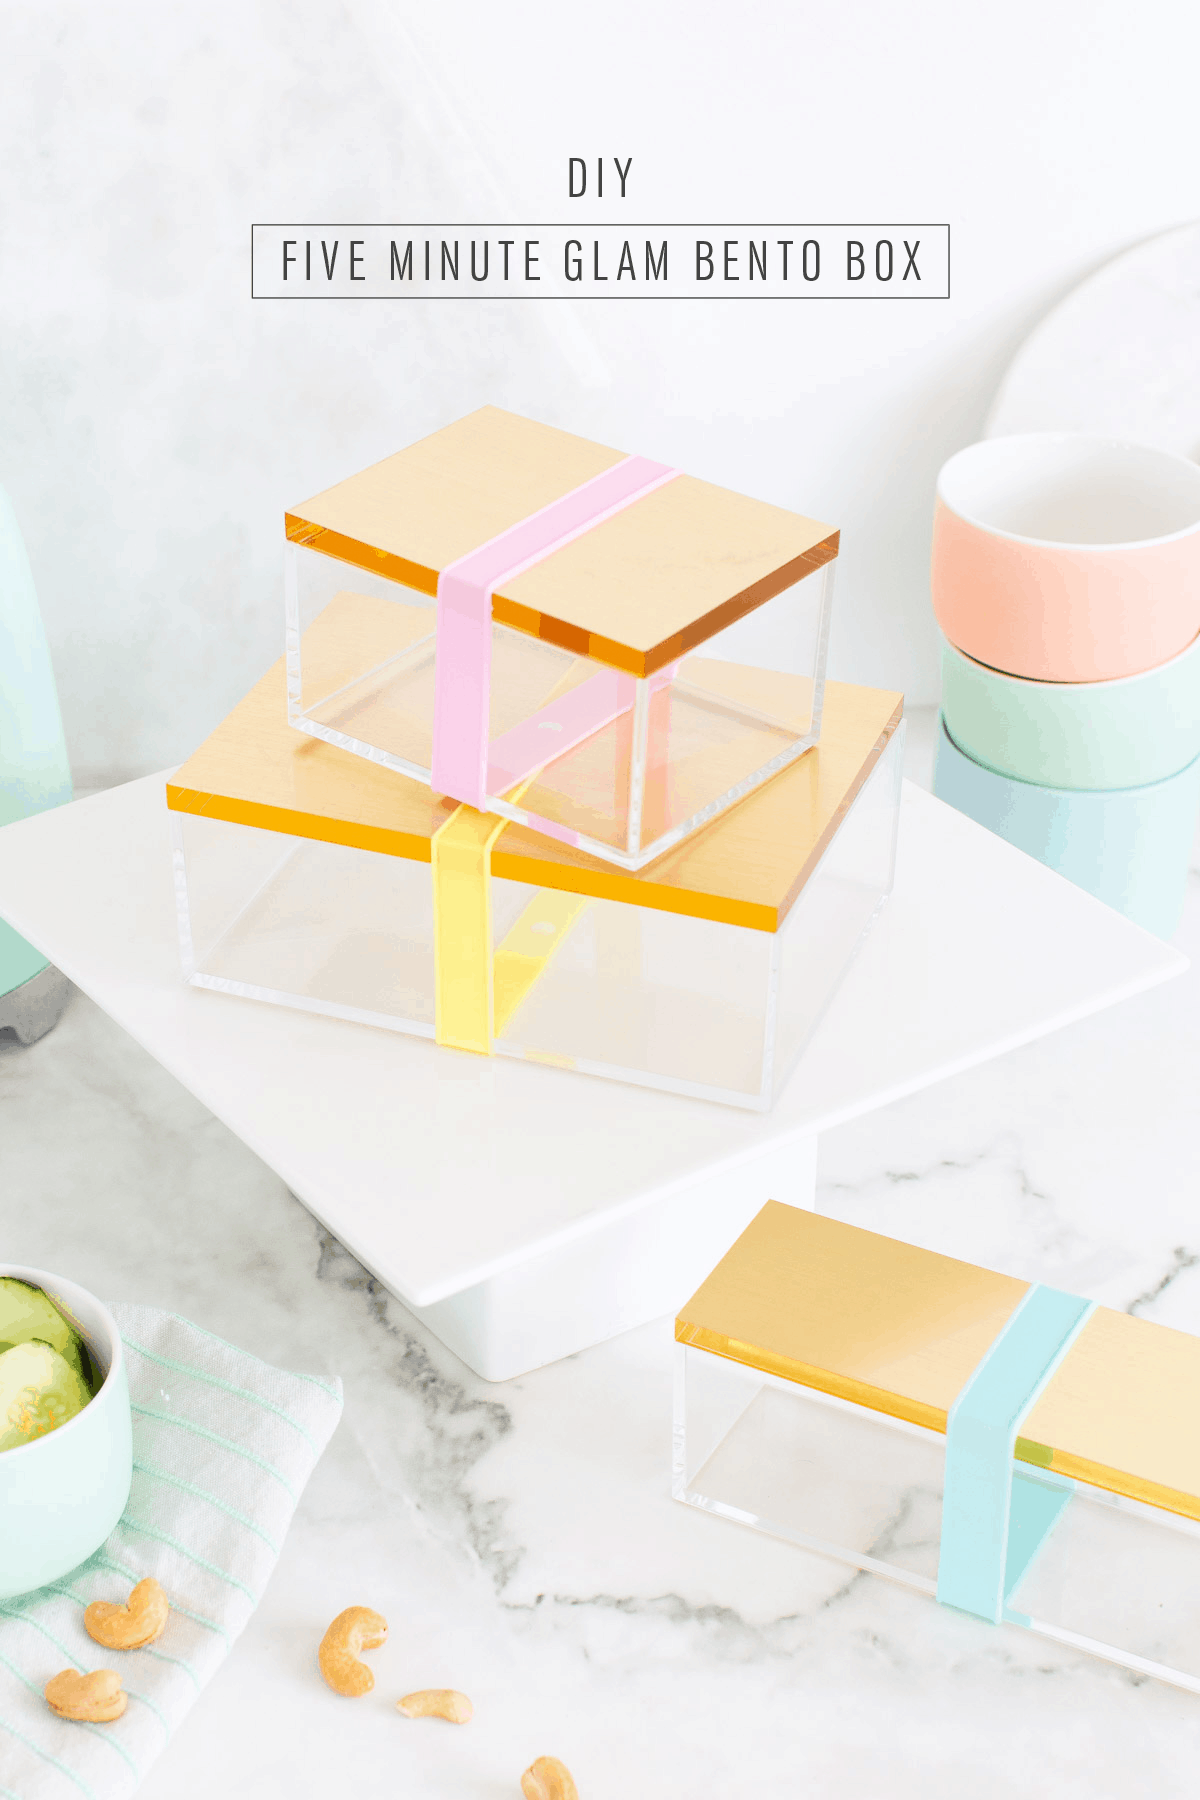 Nothing says lunch time glam quite like this five minute DIY bento box! - sugar and cloth